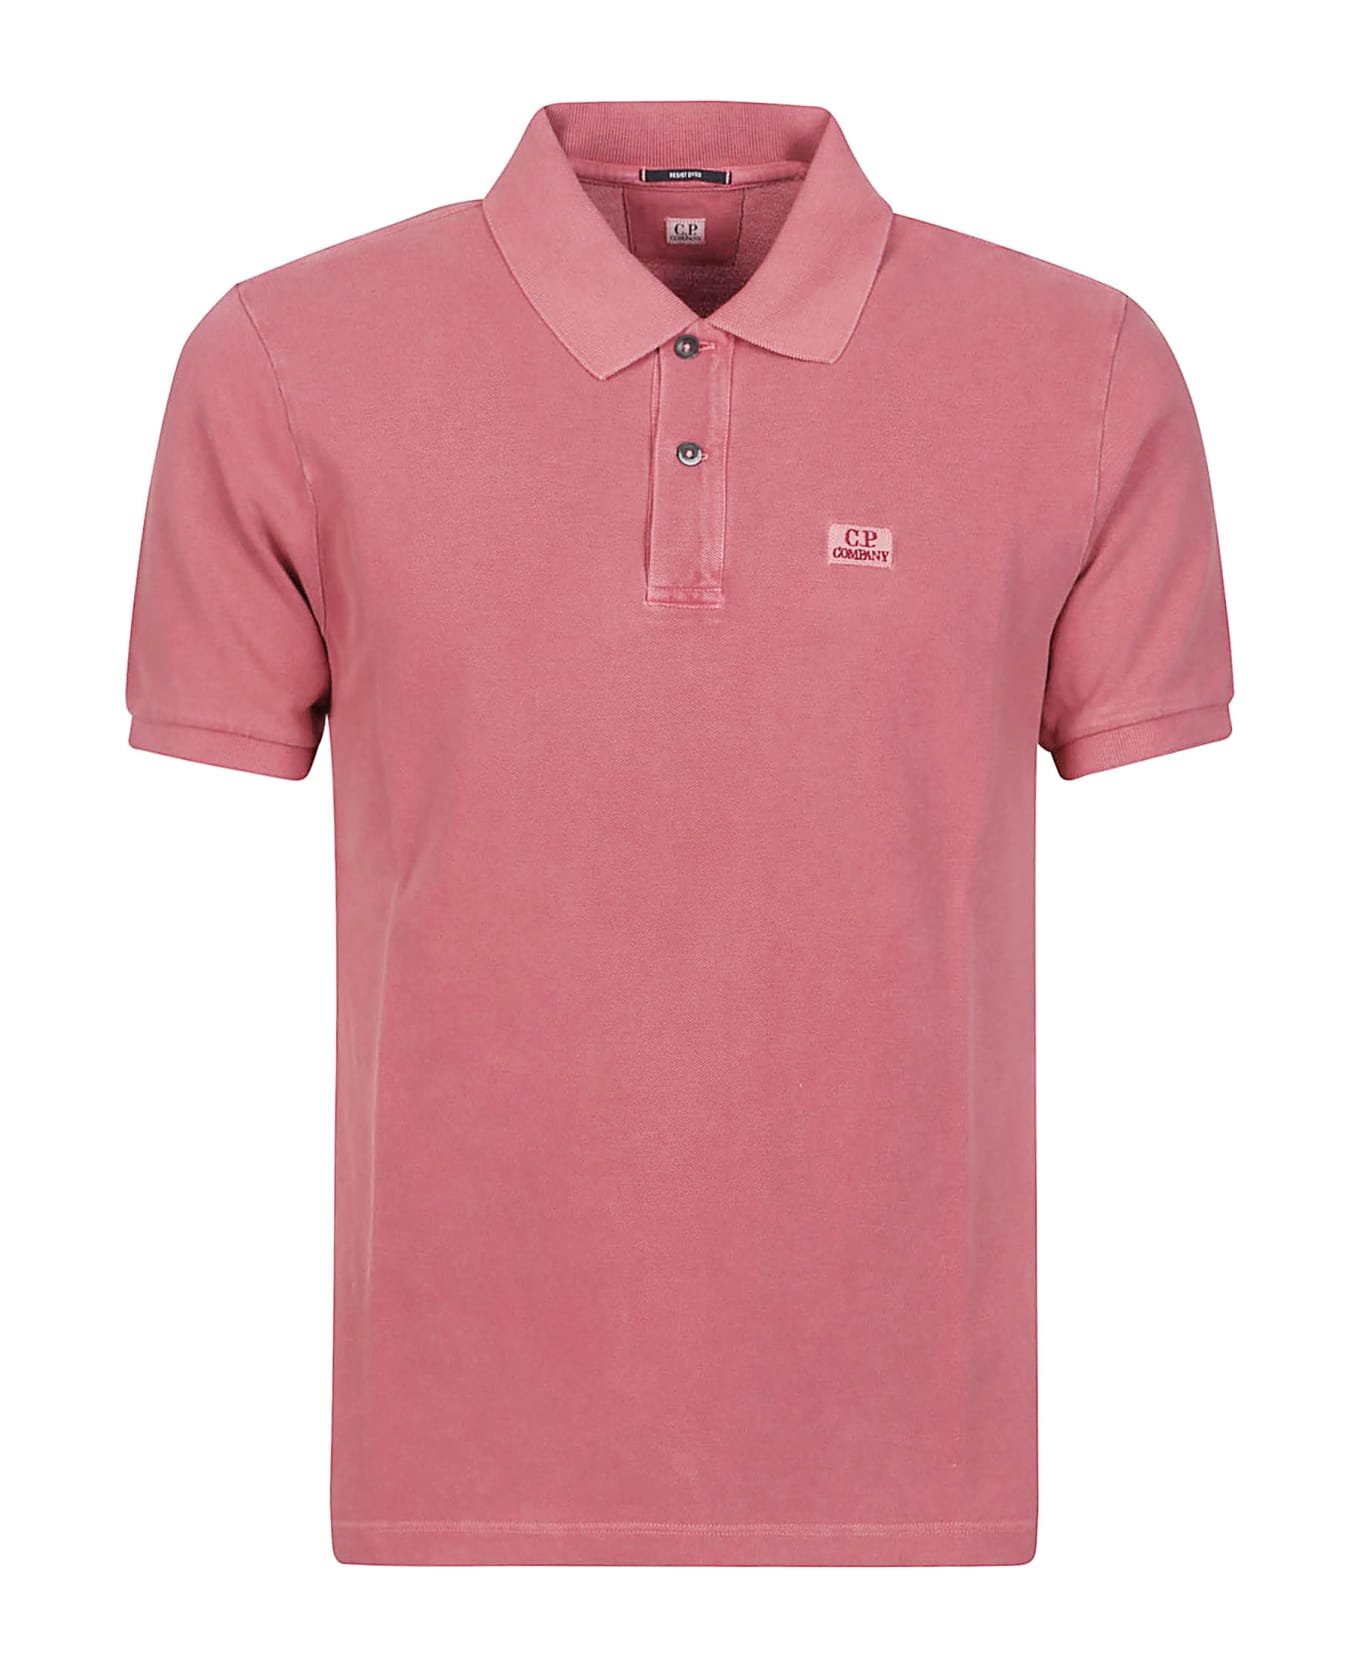 C.P. Company 24/1 Piquet Resist Dyed Short Sleeve Polo Shirt - Red Bud